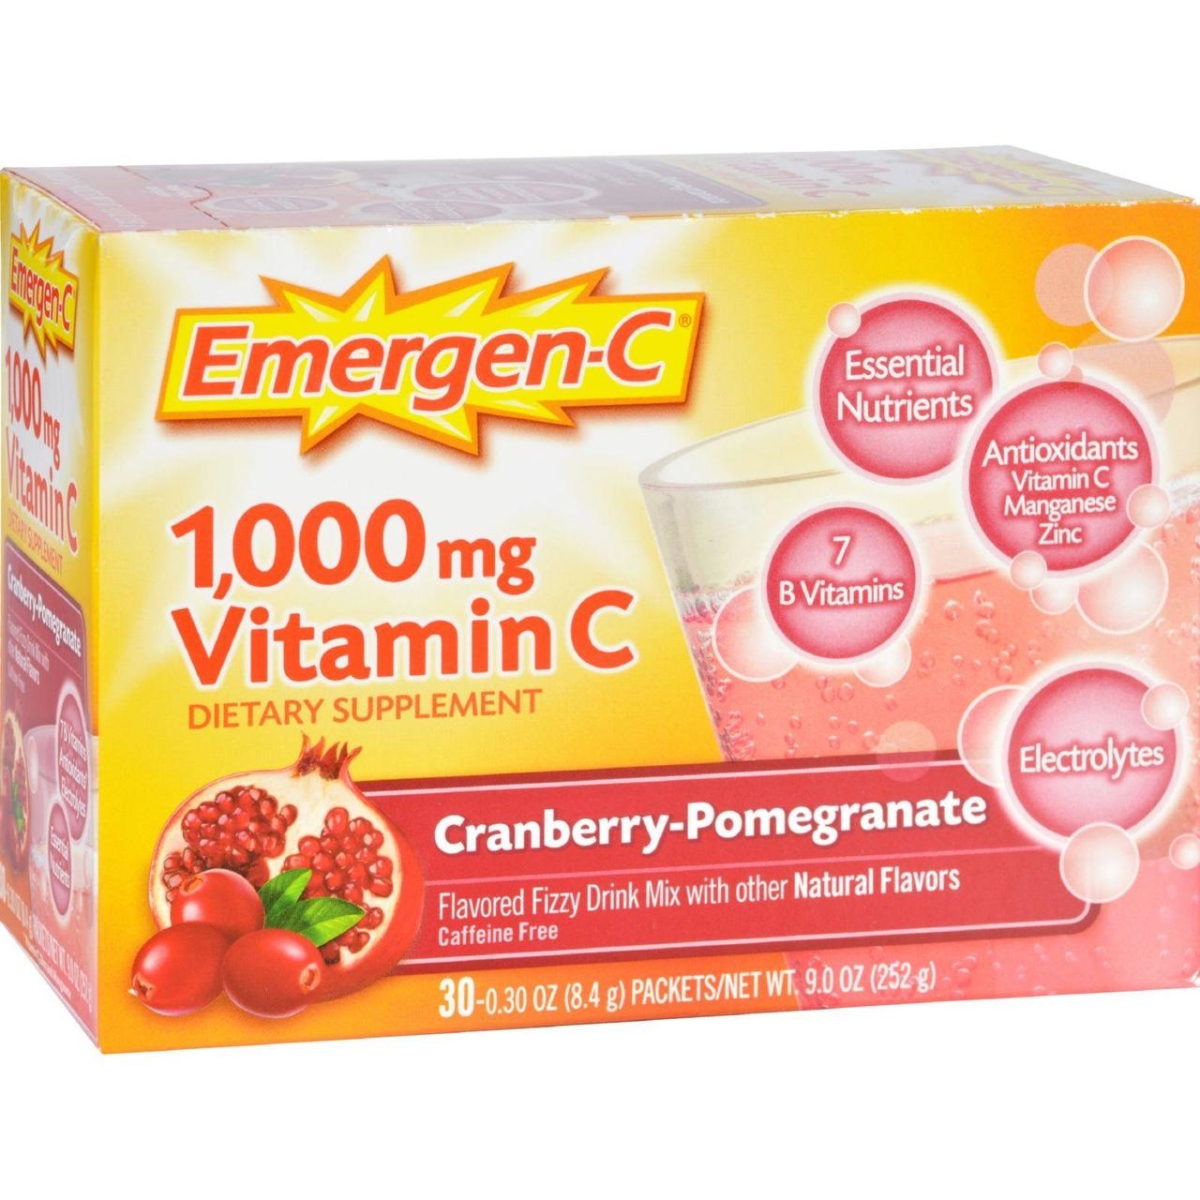 Alacer Hg0757849 1000 Mg Emergen-c Vitamin C Fizzy Drink Mix - Cranberry Pomegranate, 30 Packet